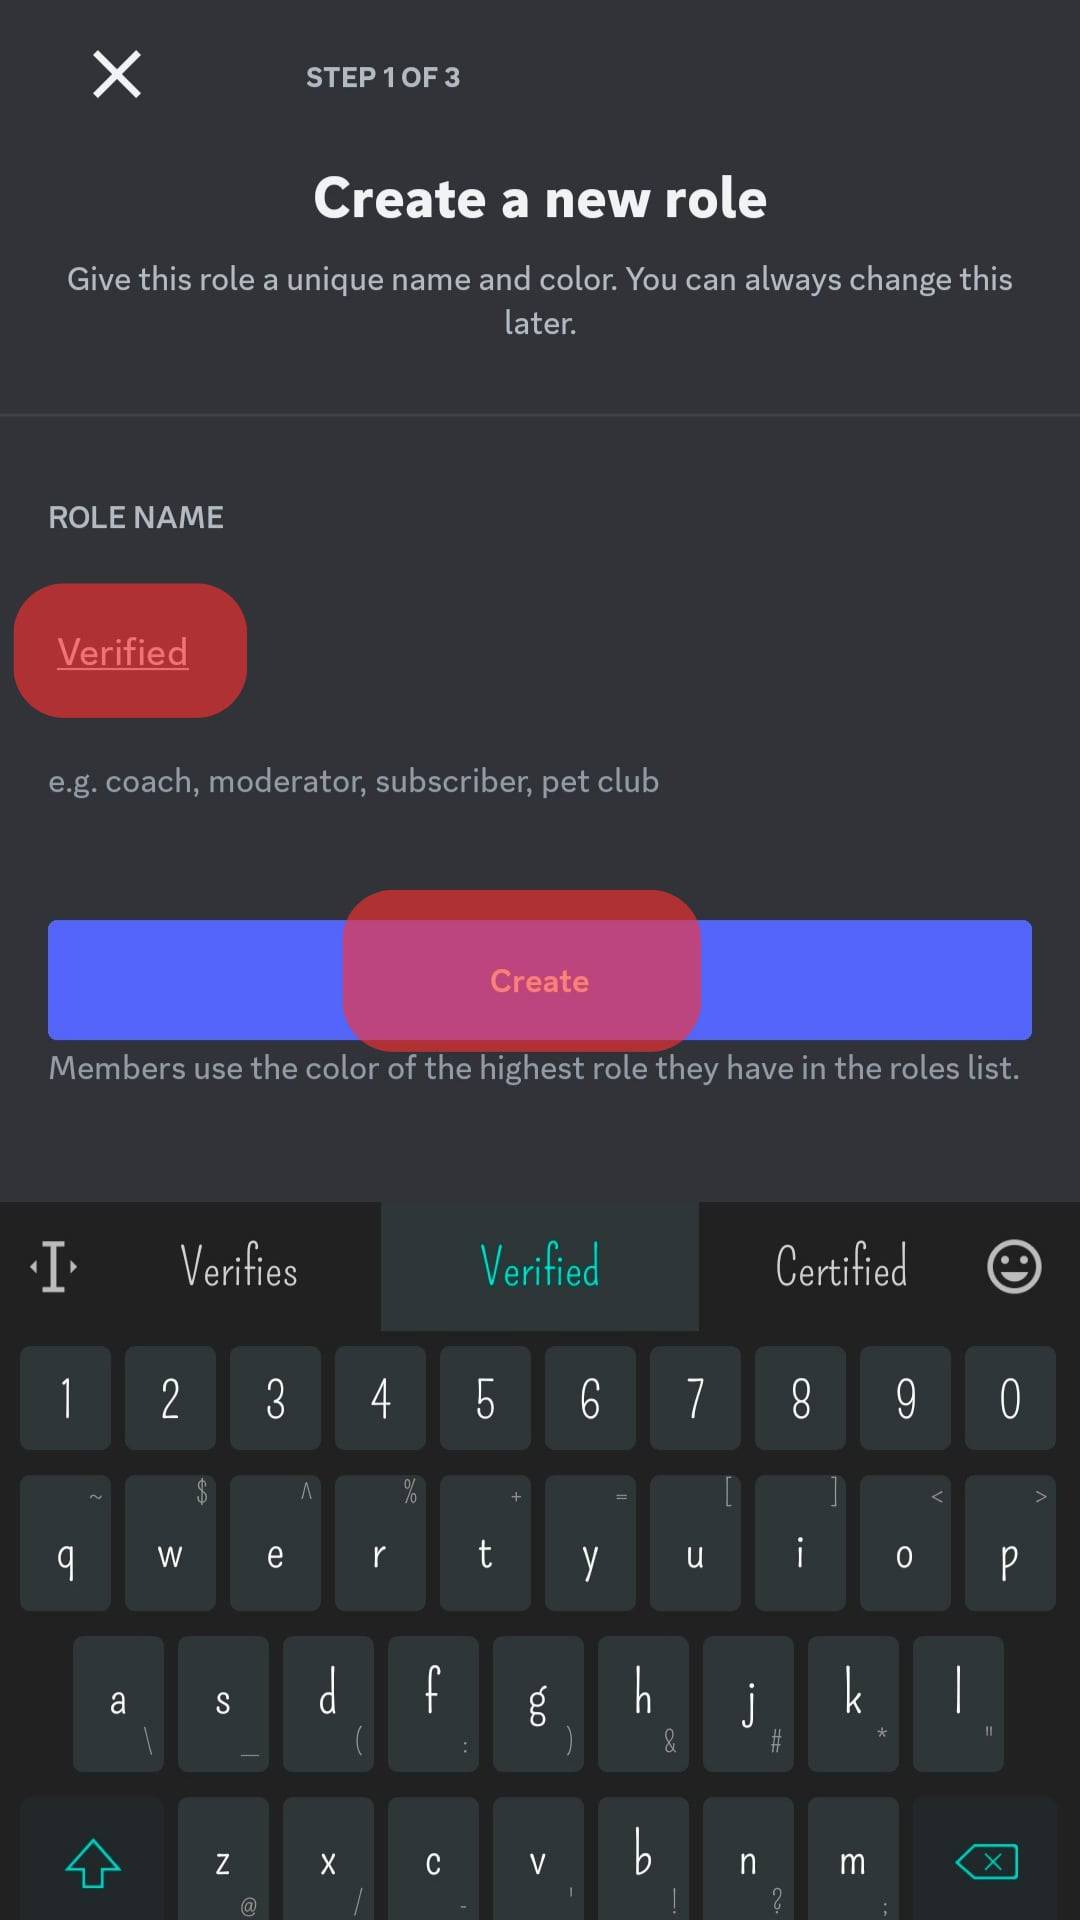 Name It Verified And Tap Create.